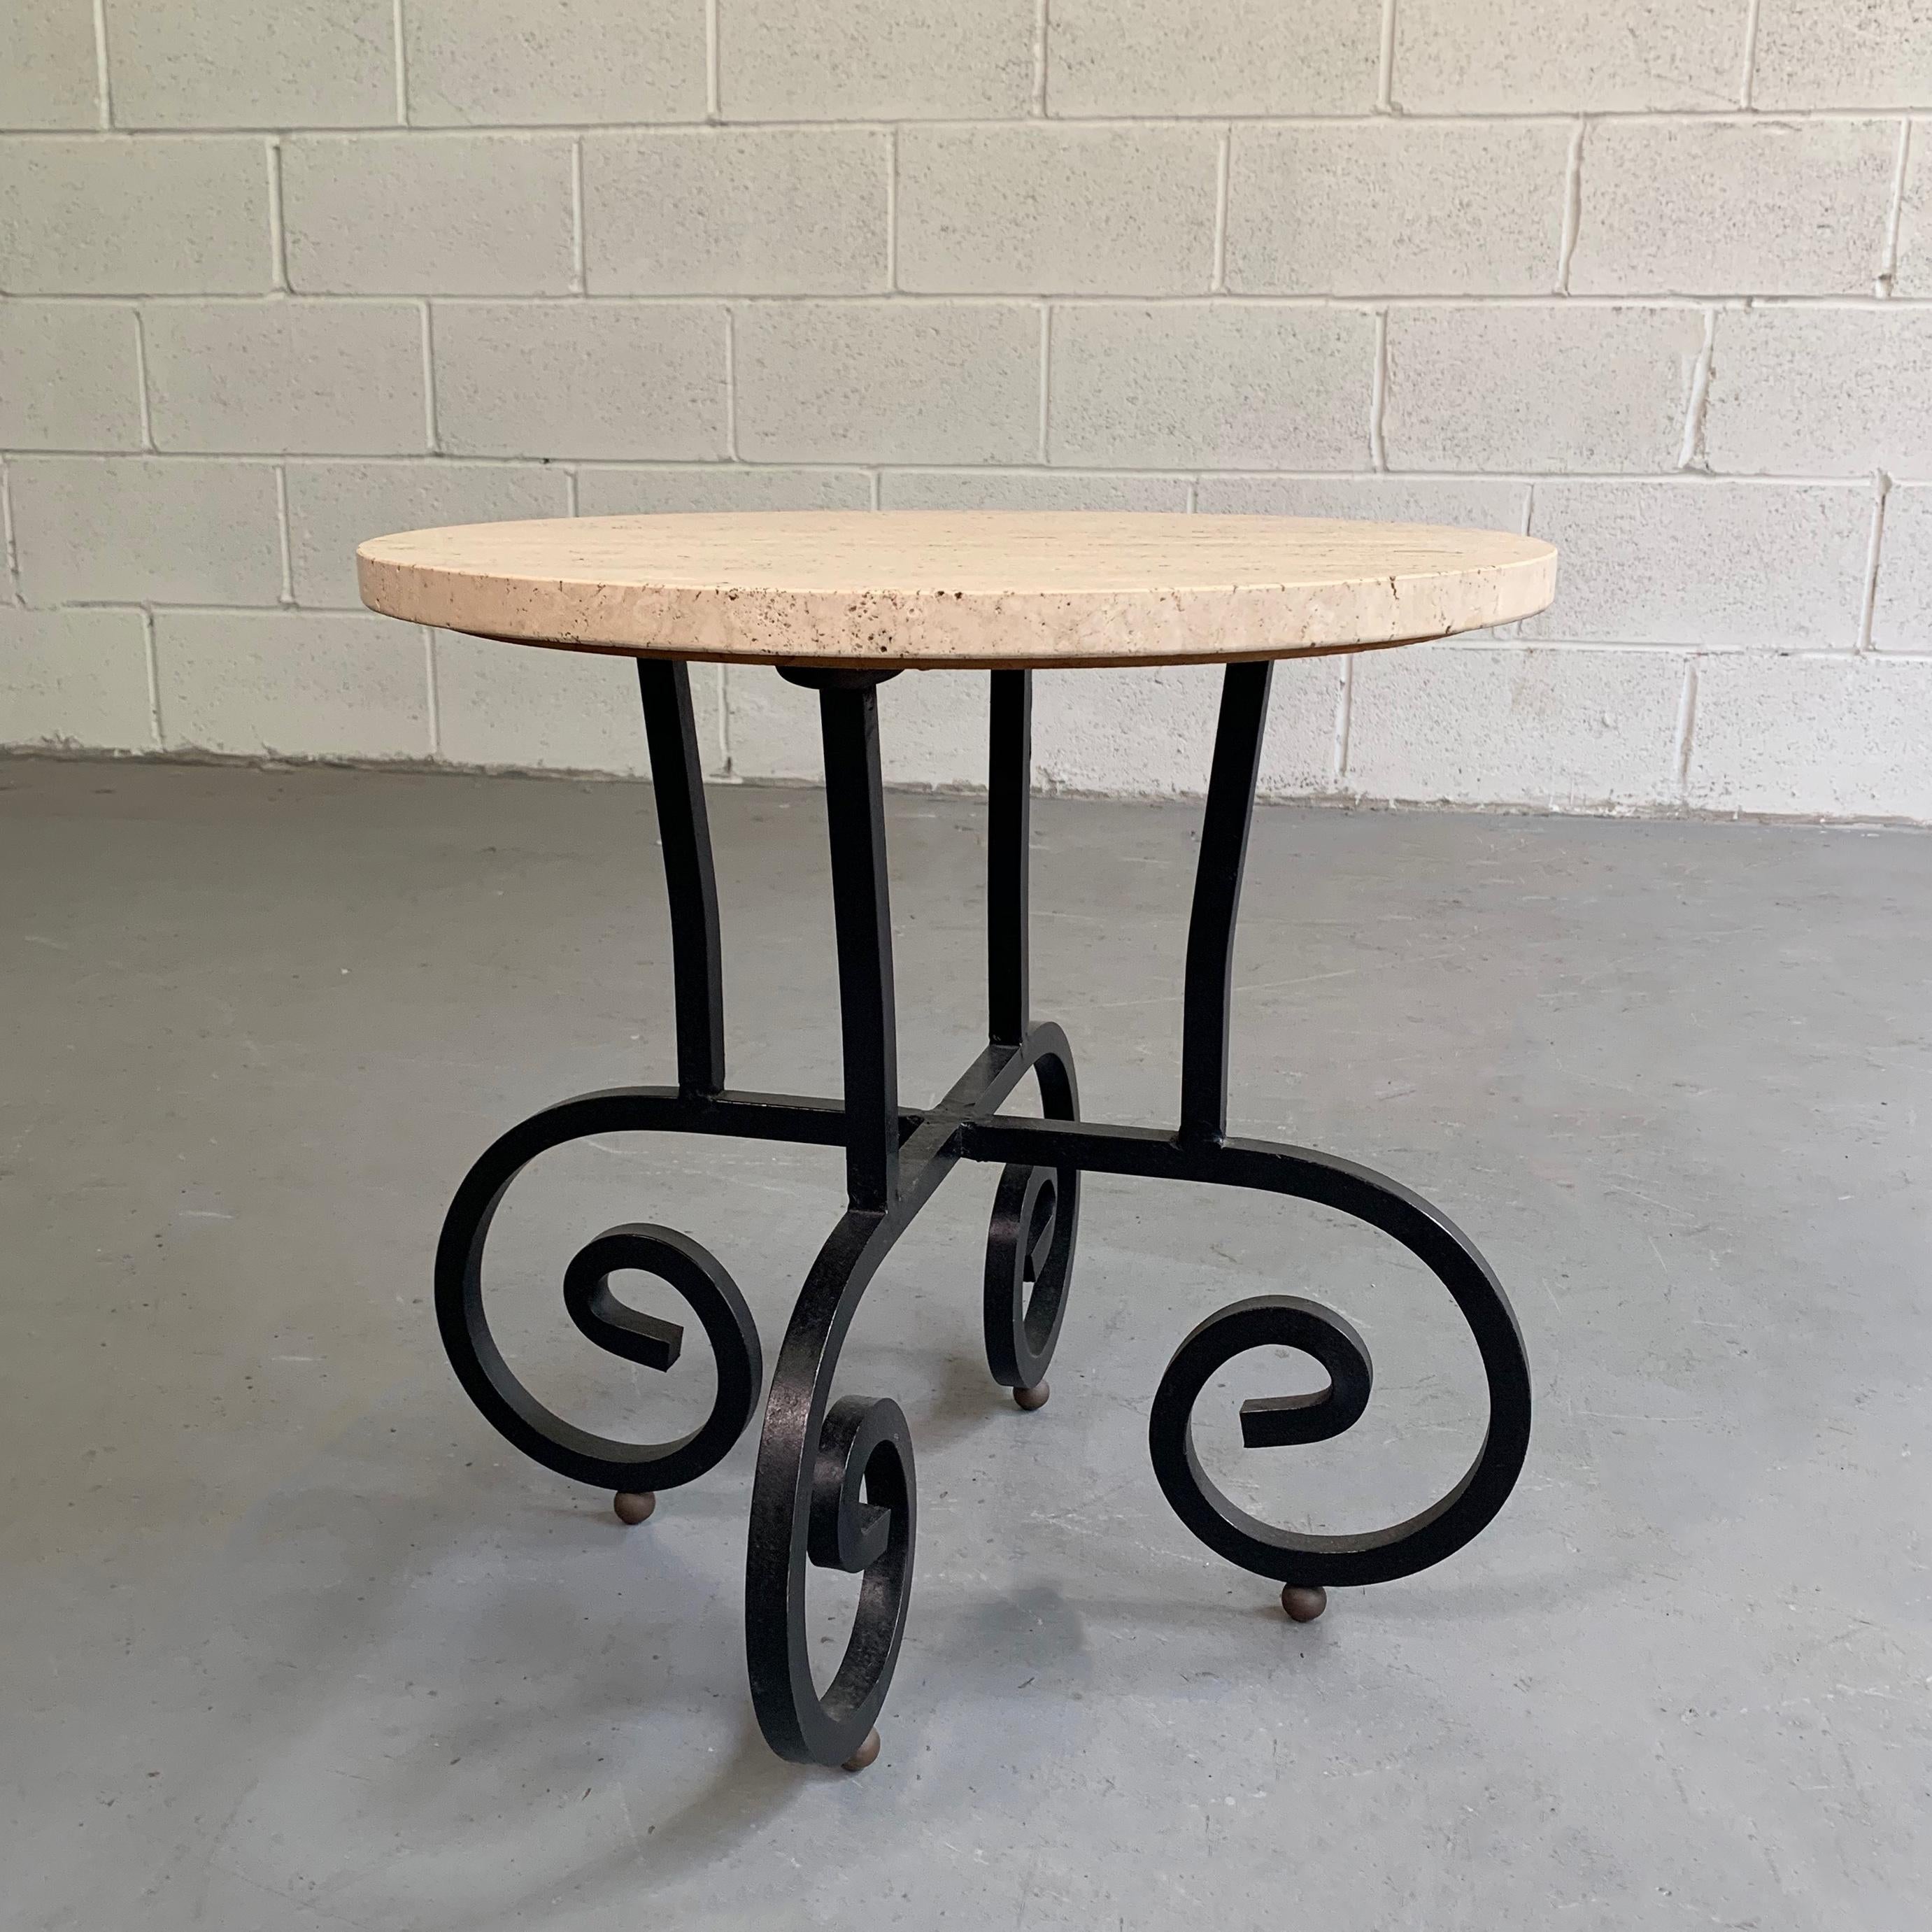 Hollywood regency side table features a round travertine top with scrolled wrought iron base.